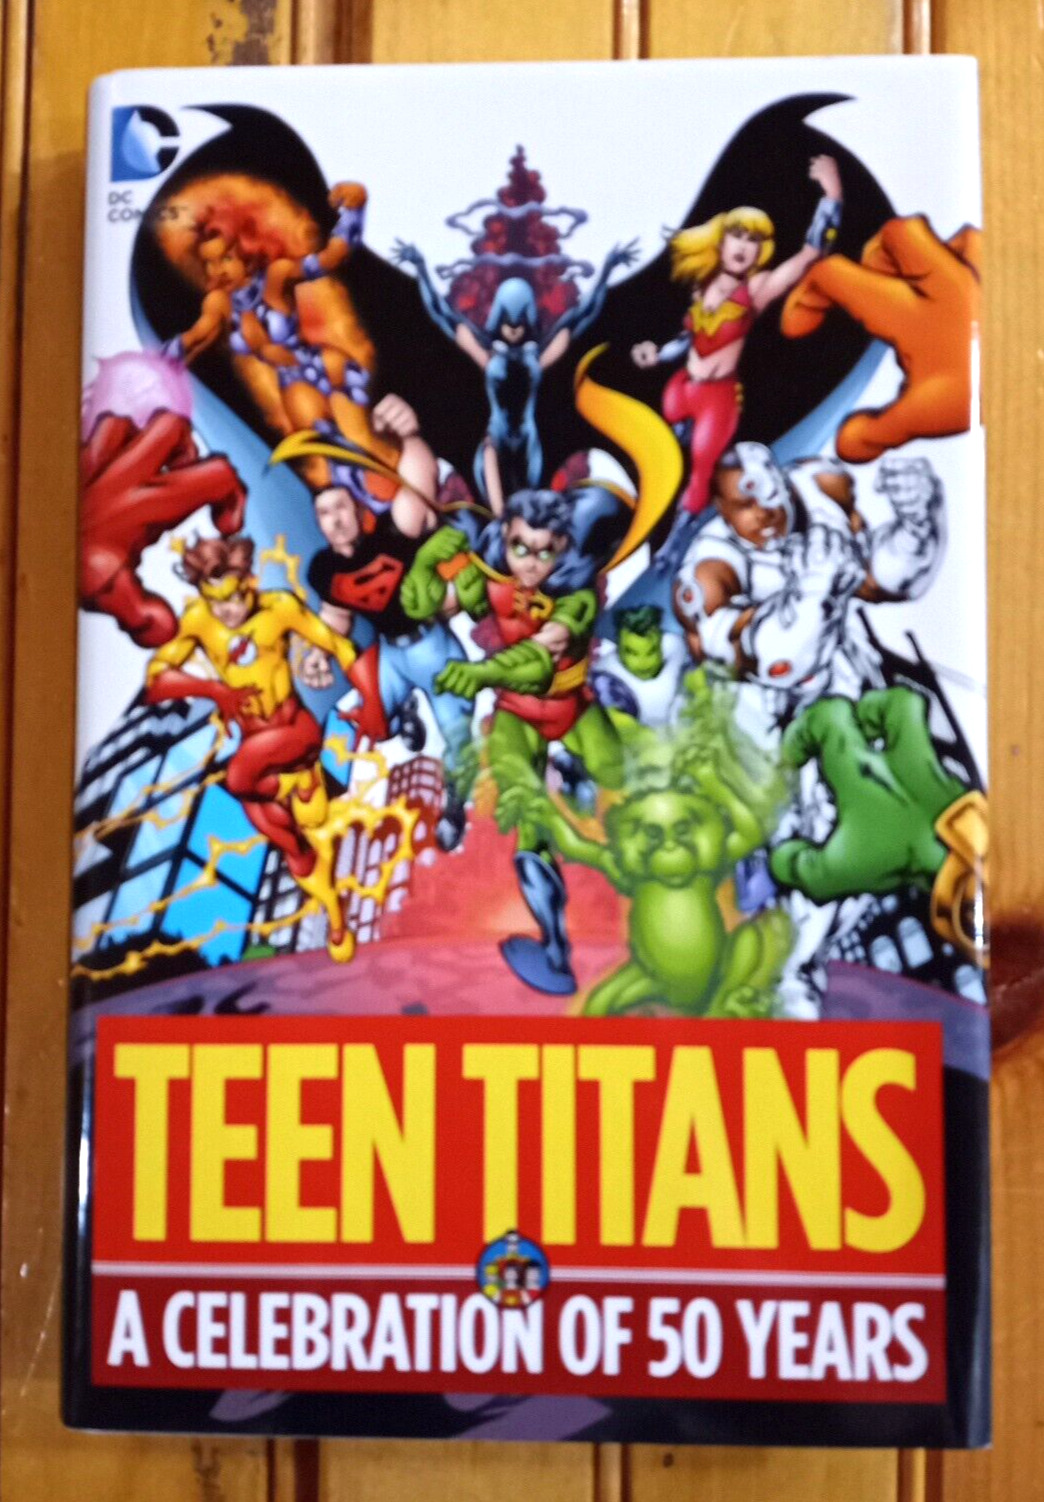 Teen Titans: A Celebration of 50 Years Hardcover Book